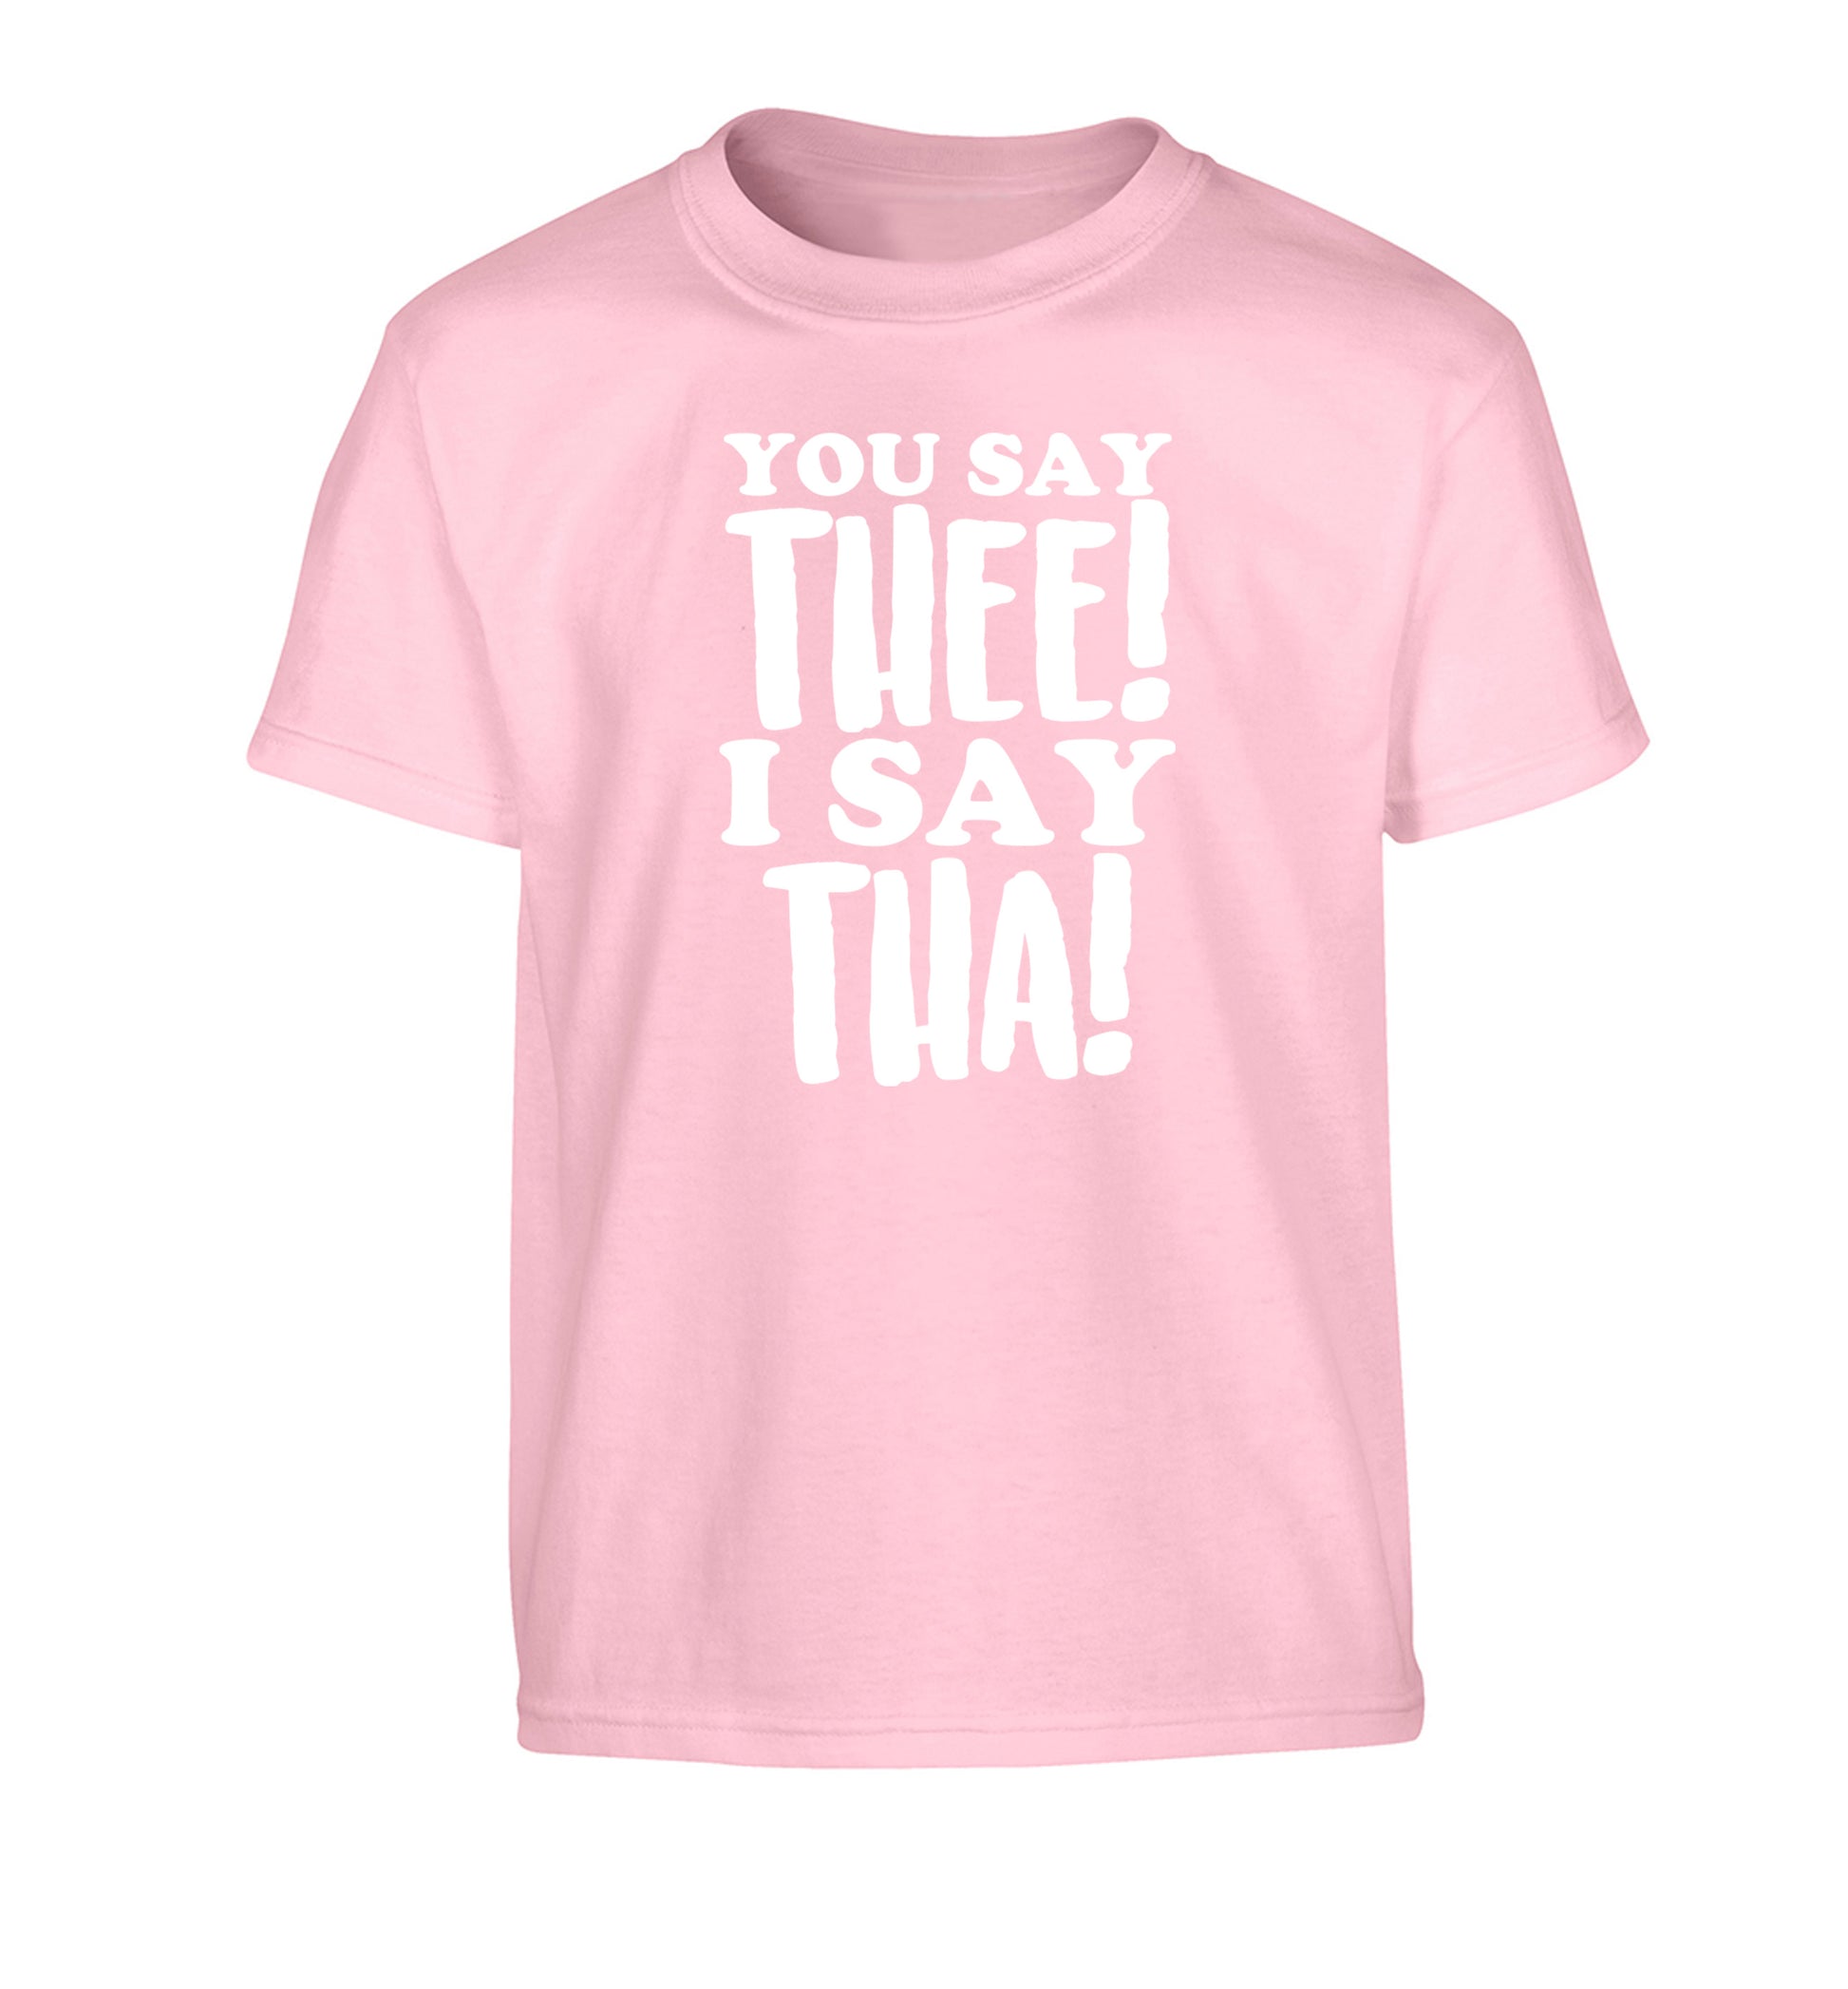 You say thee I say tha Children's light pink Tshirt 12-14 Years